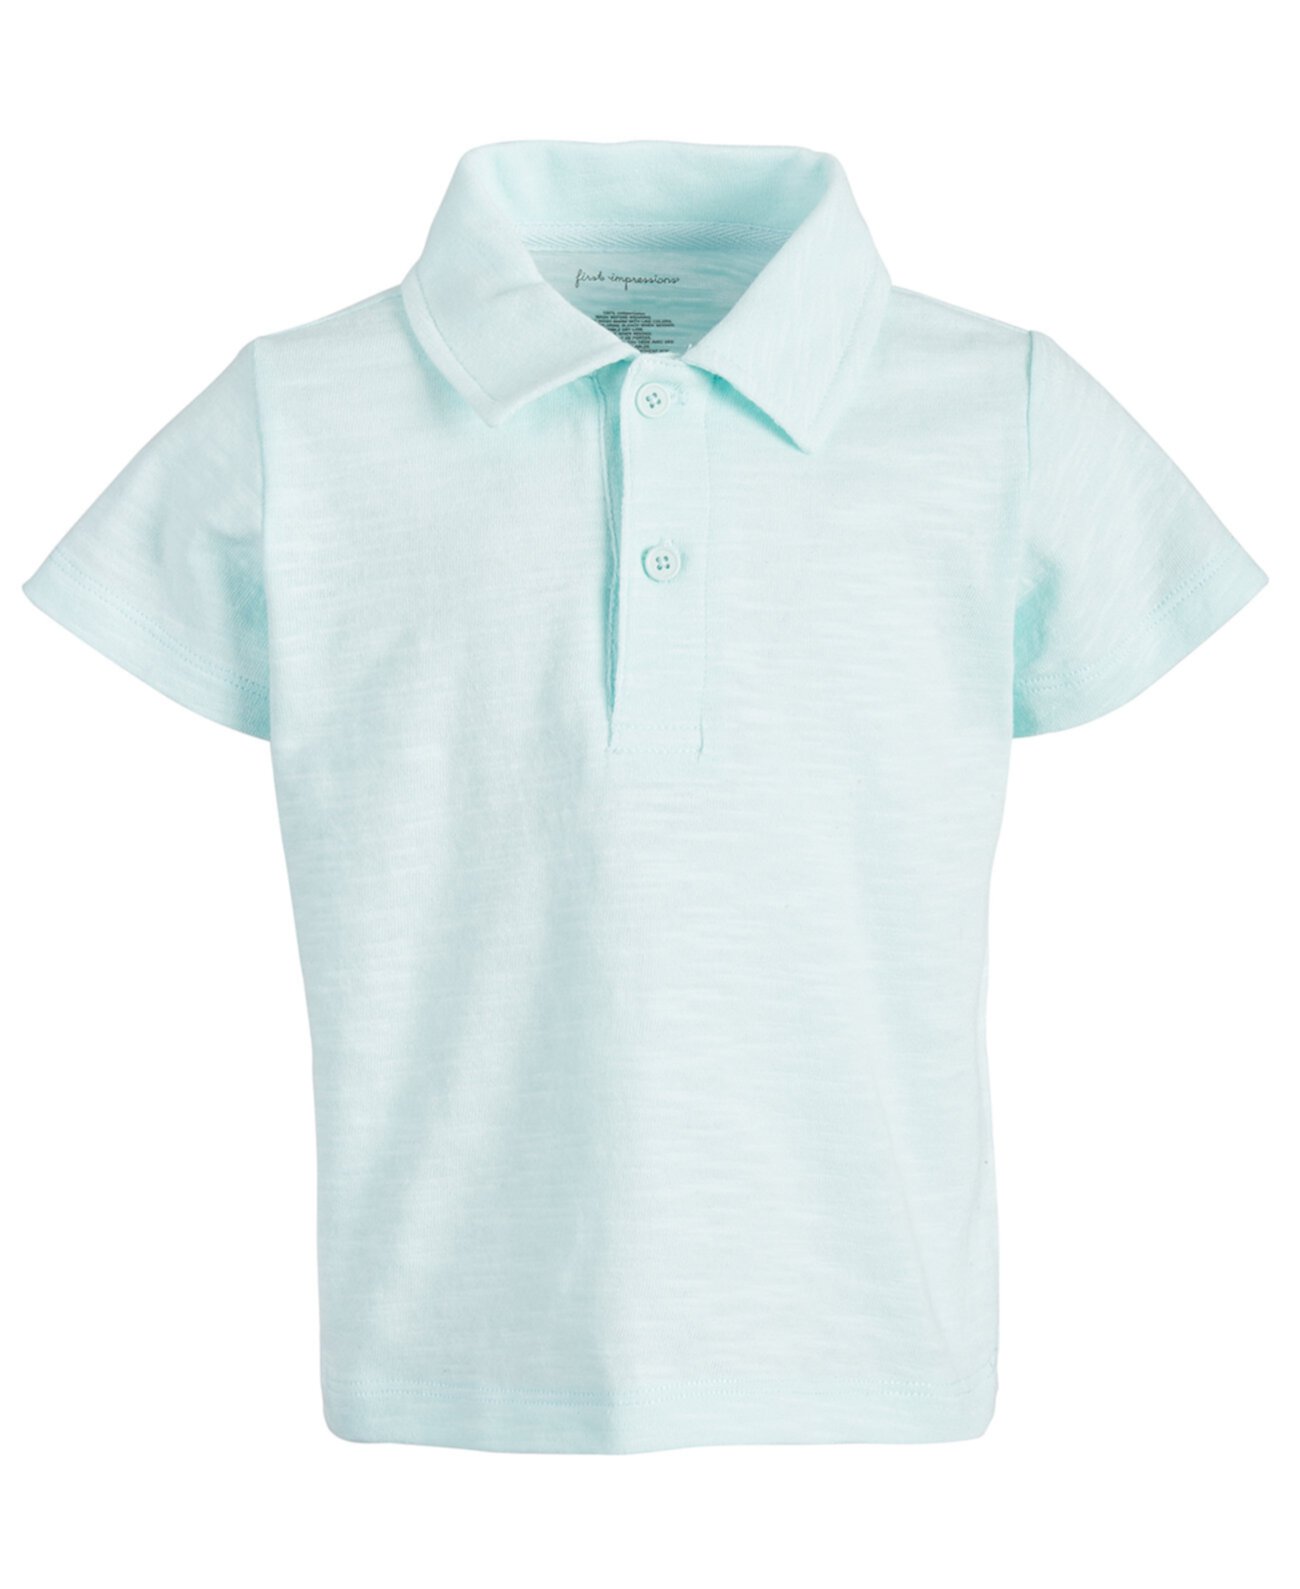 Baby Boys Solid Cotton Polo, Created for Macy's First Impressions